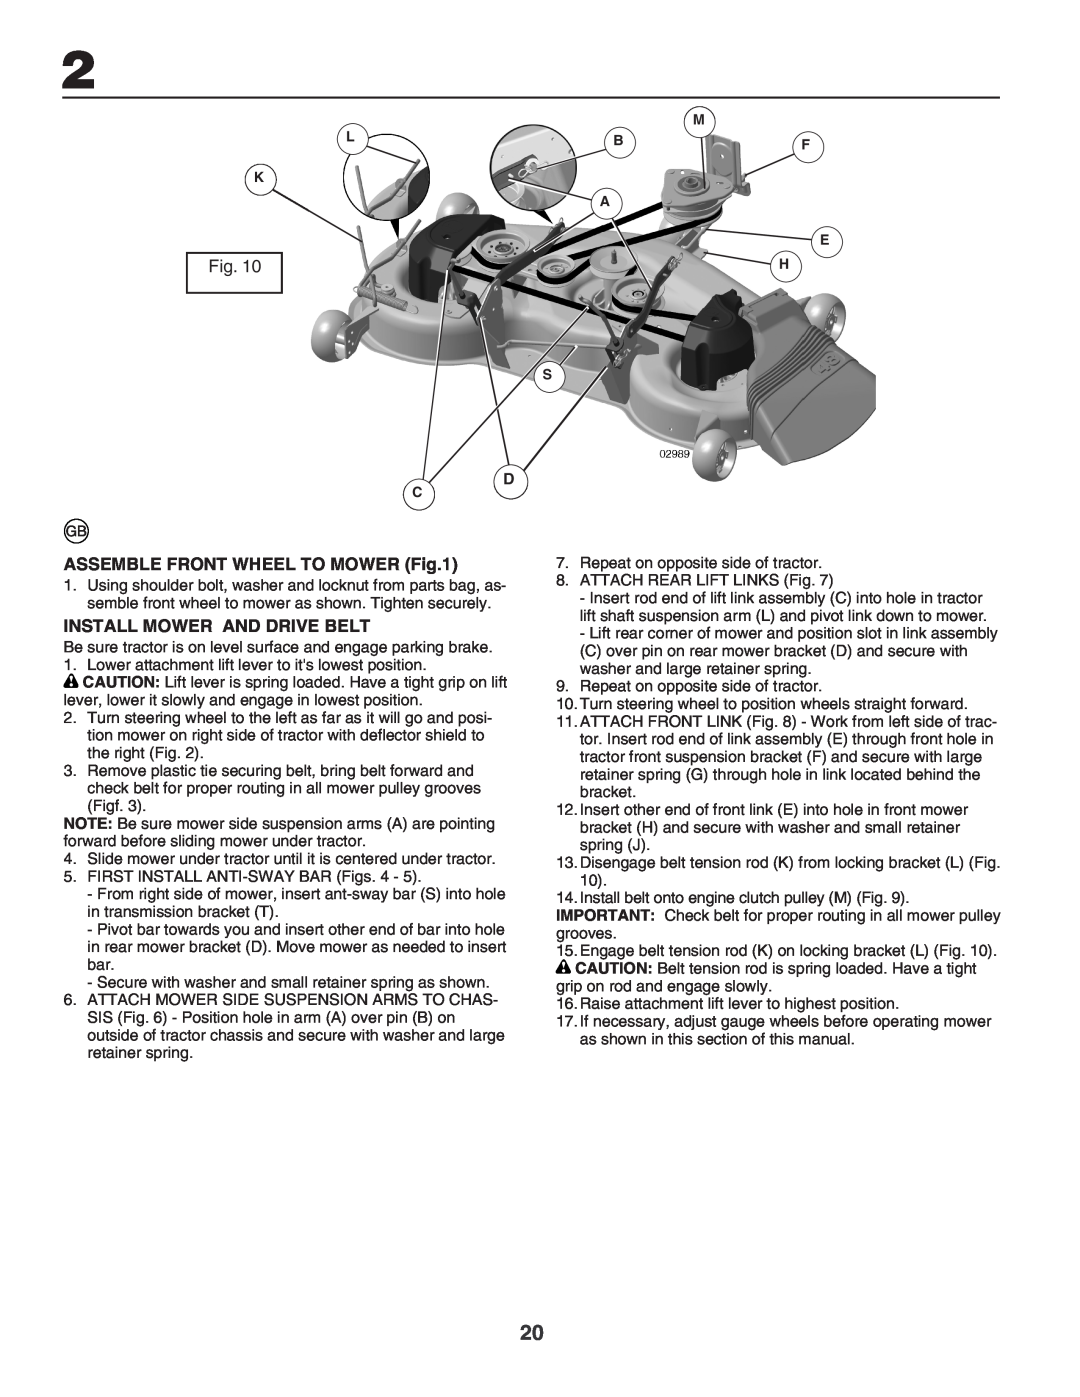 Husqvarna GTH260XP instruction manual Assemble Front Wheel To Mower, Install Mower And Drive Belt 